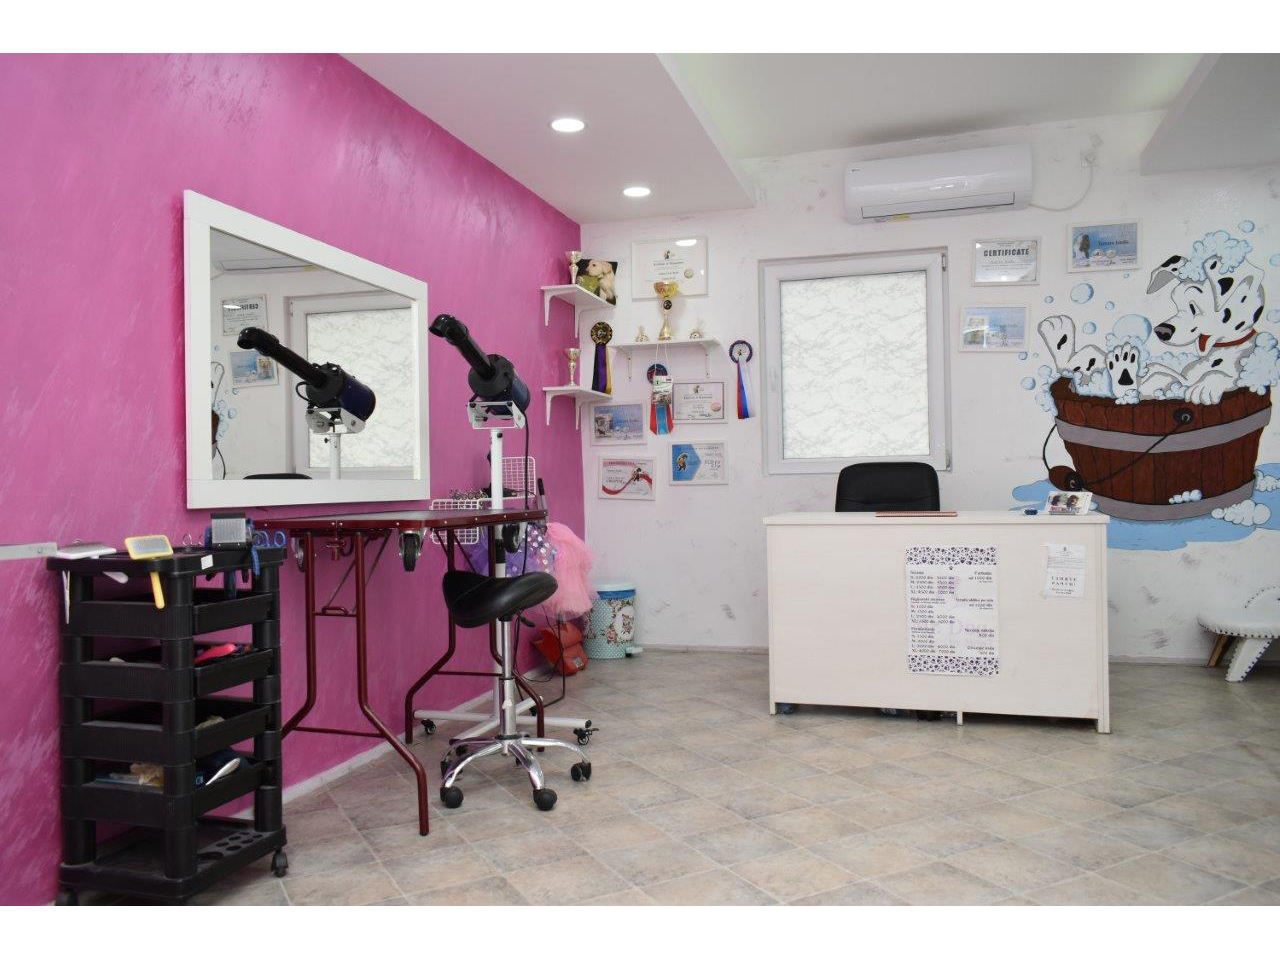 Photo 1 - MR DOG GROOMING - STUDIO AND SCHOOL FOR DOG GROOMING Pet salon, dog grooming Belgrade